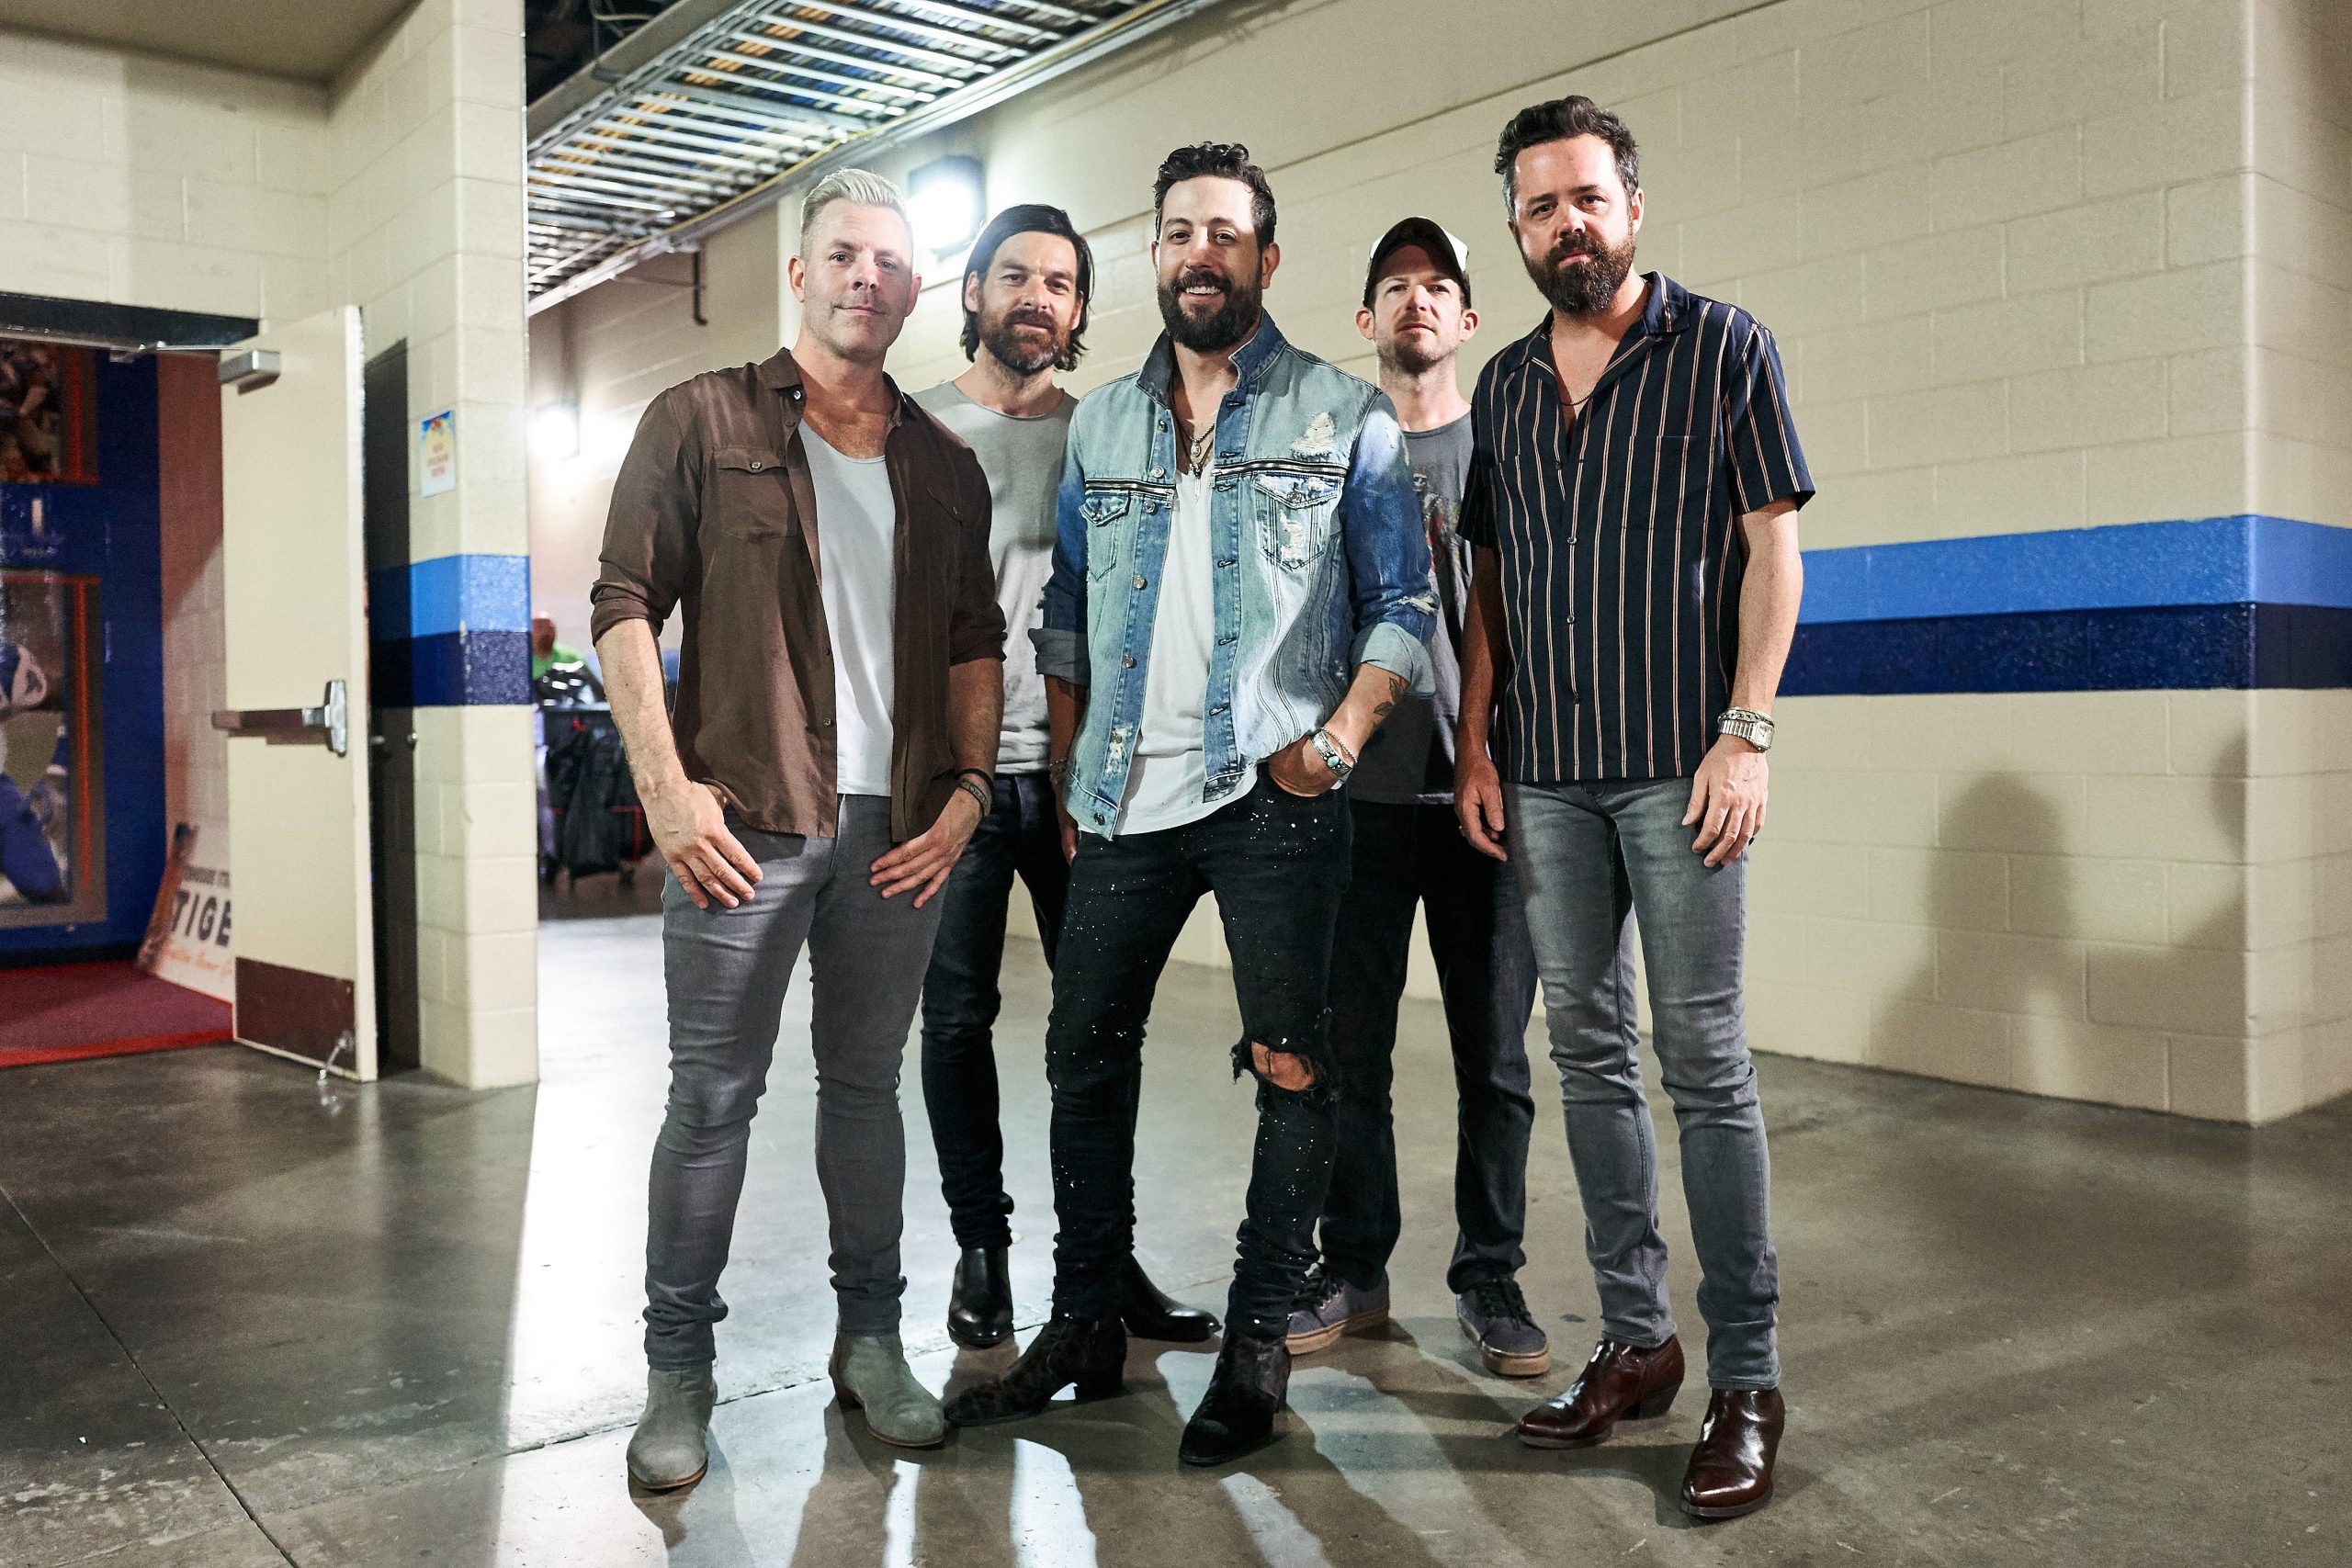 Old Dominion Toast True Love and Friendship on 'One Man Band' Sounds ...